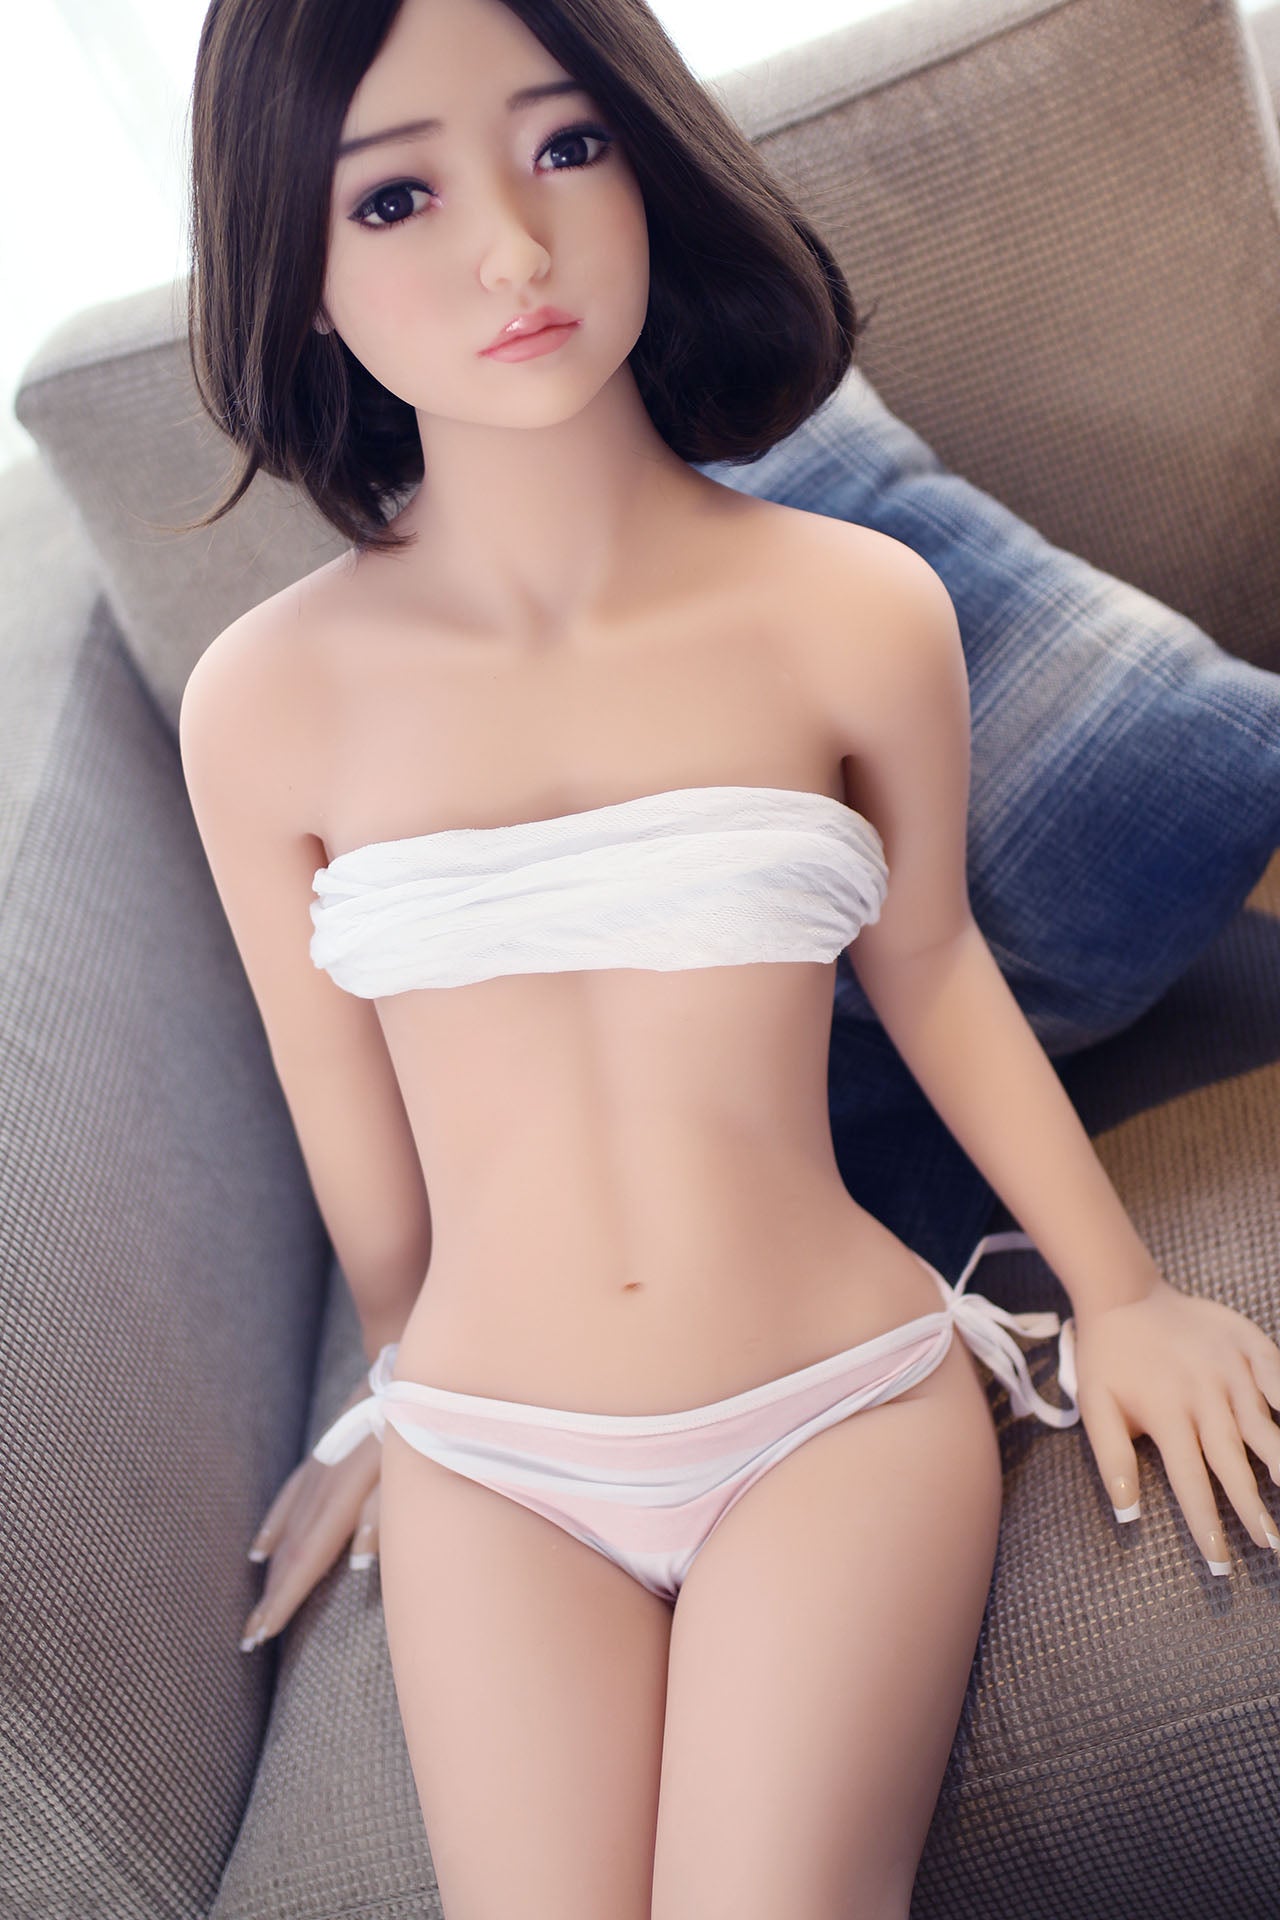 Miki - Cute Japanese Life-Like Sex Doll With Short Black Hair (In Stock EU)